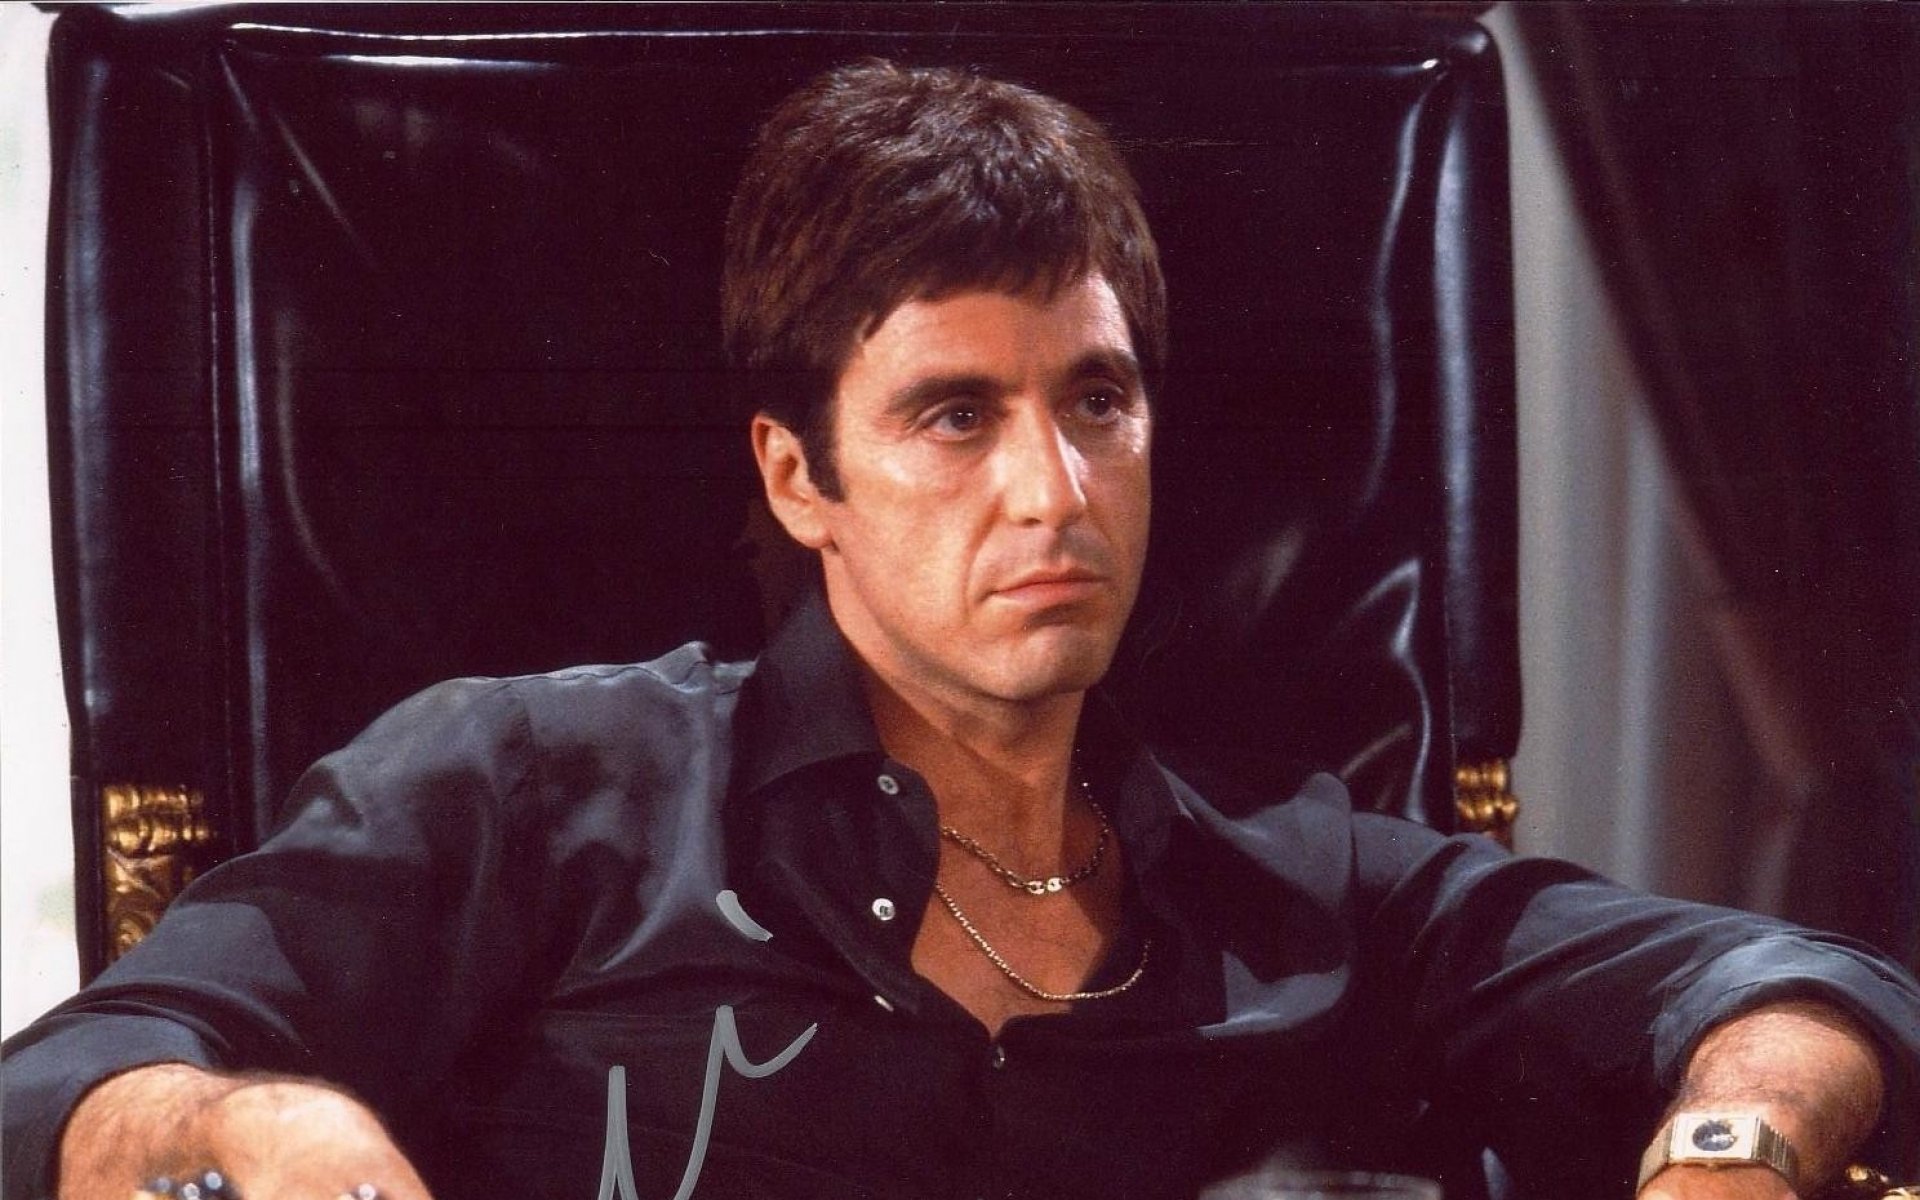 download scarface full movie free